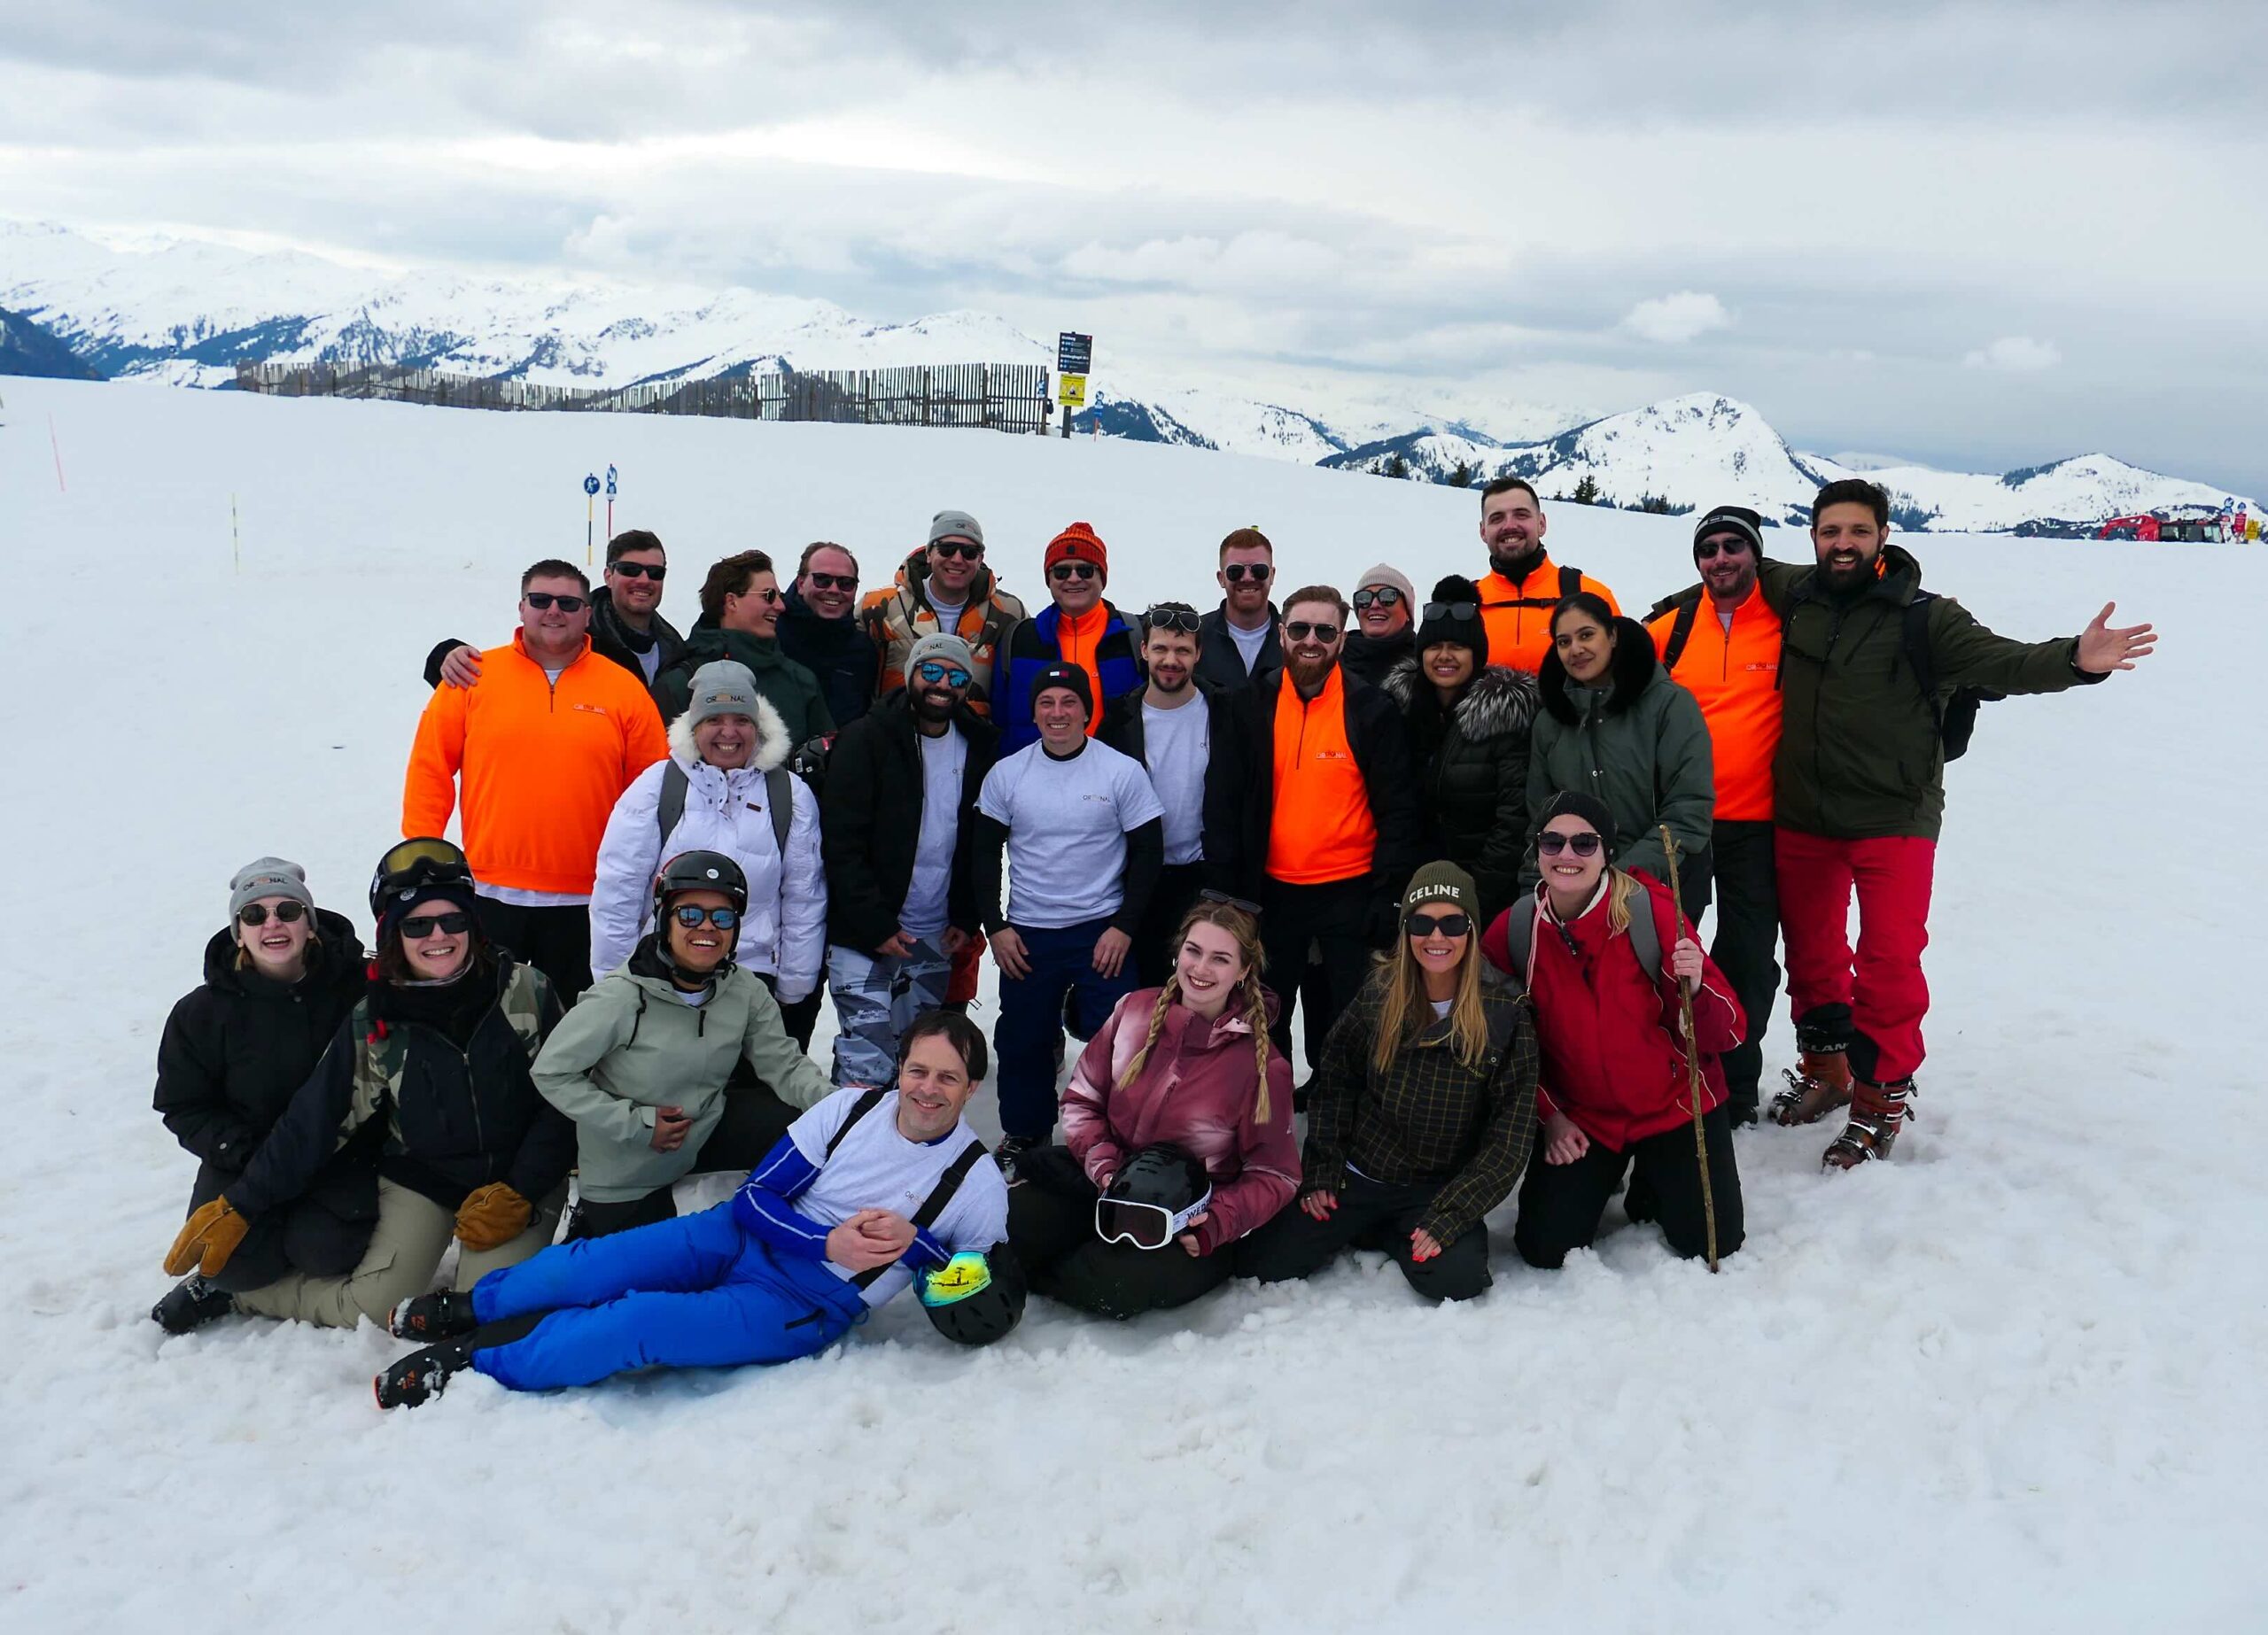 A photo of the whole team taken in the alps